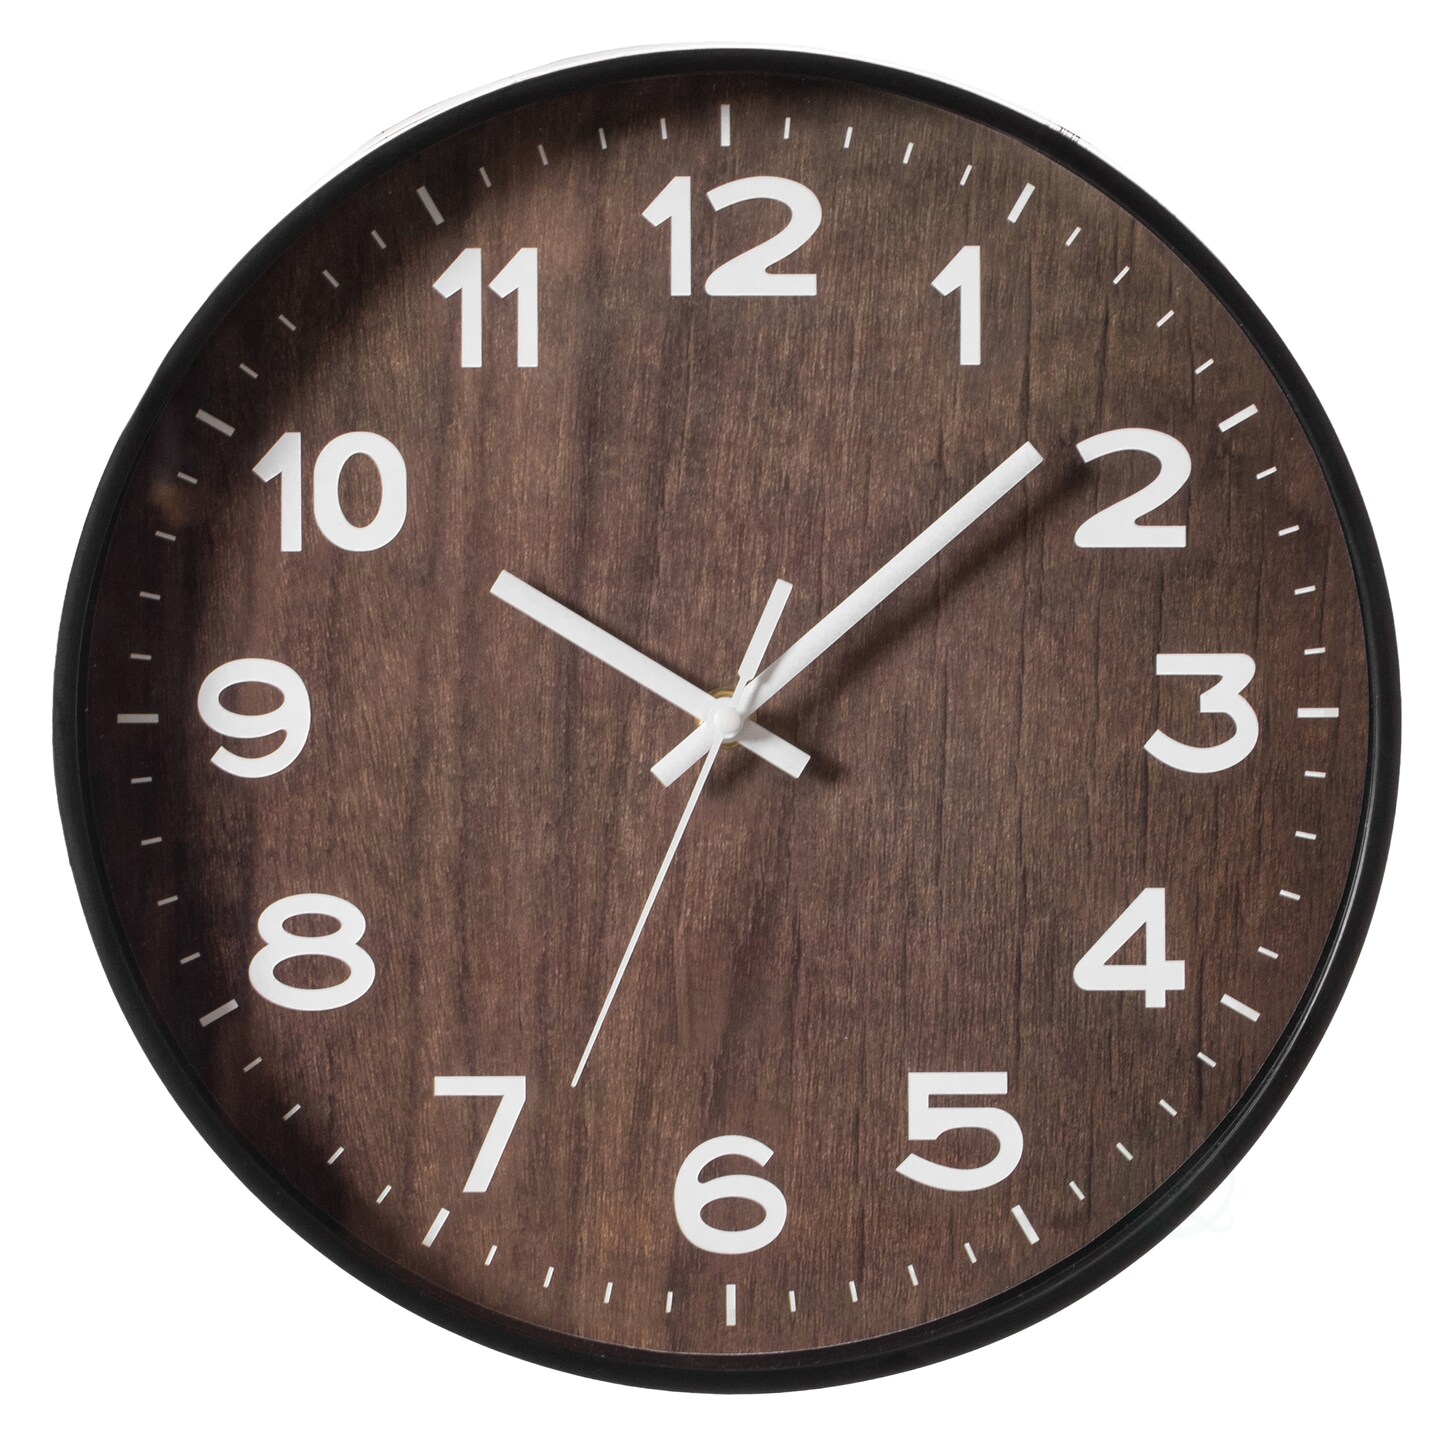 Decorative Modern Round Wood- Looking Plastic Wall Clock for Living Room, Kitchen, or Dining Room